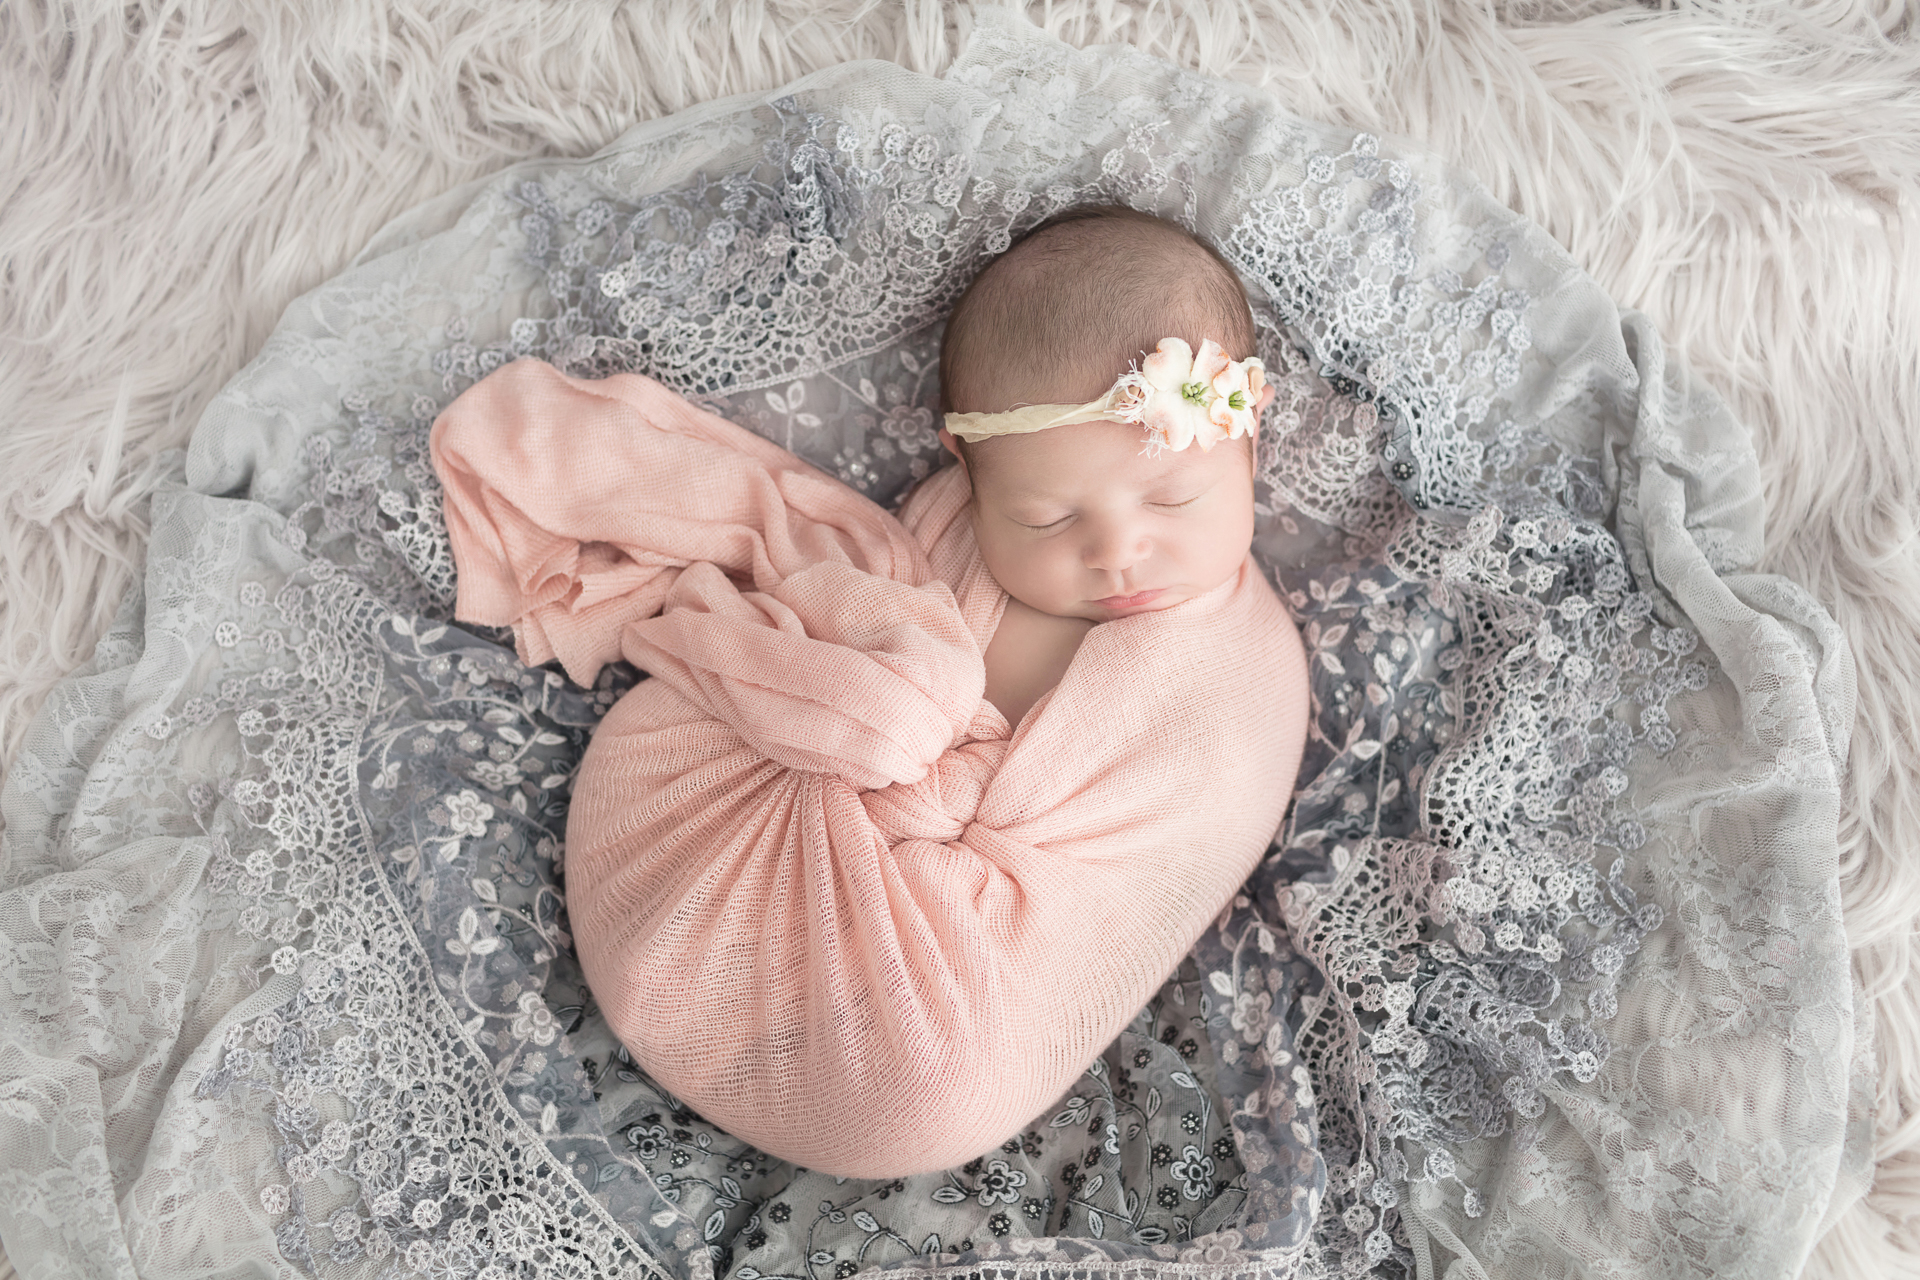 Newborn portrait session of baby girl with peach and white flower headband swaddled in peach wrap surrounded by gray lace and gray fur